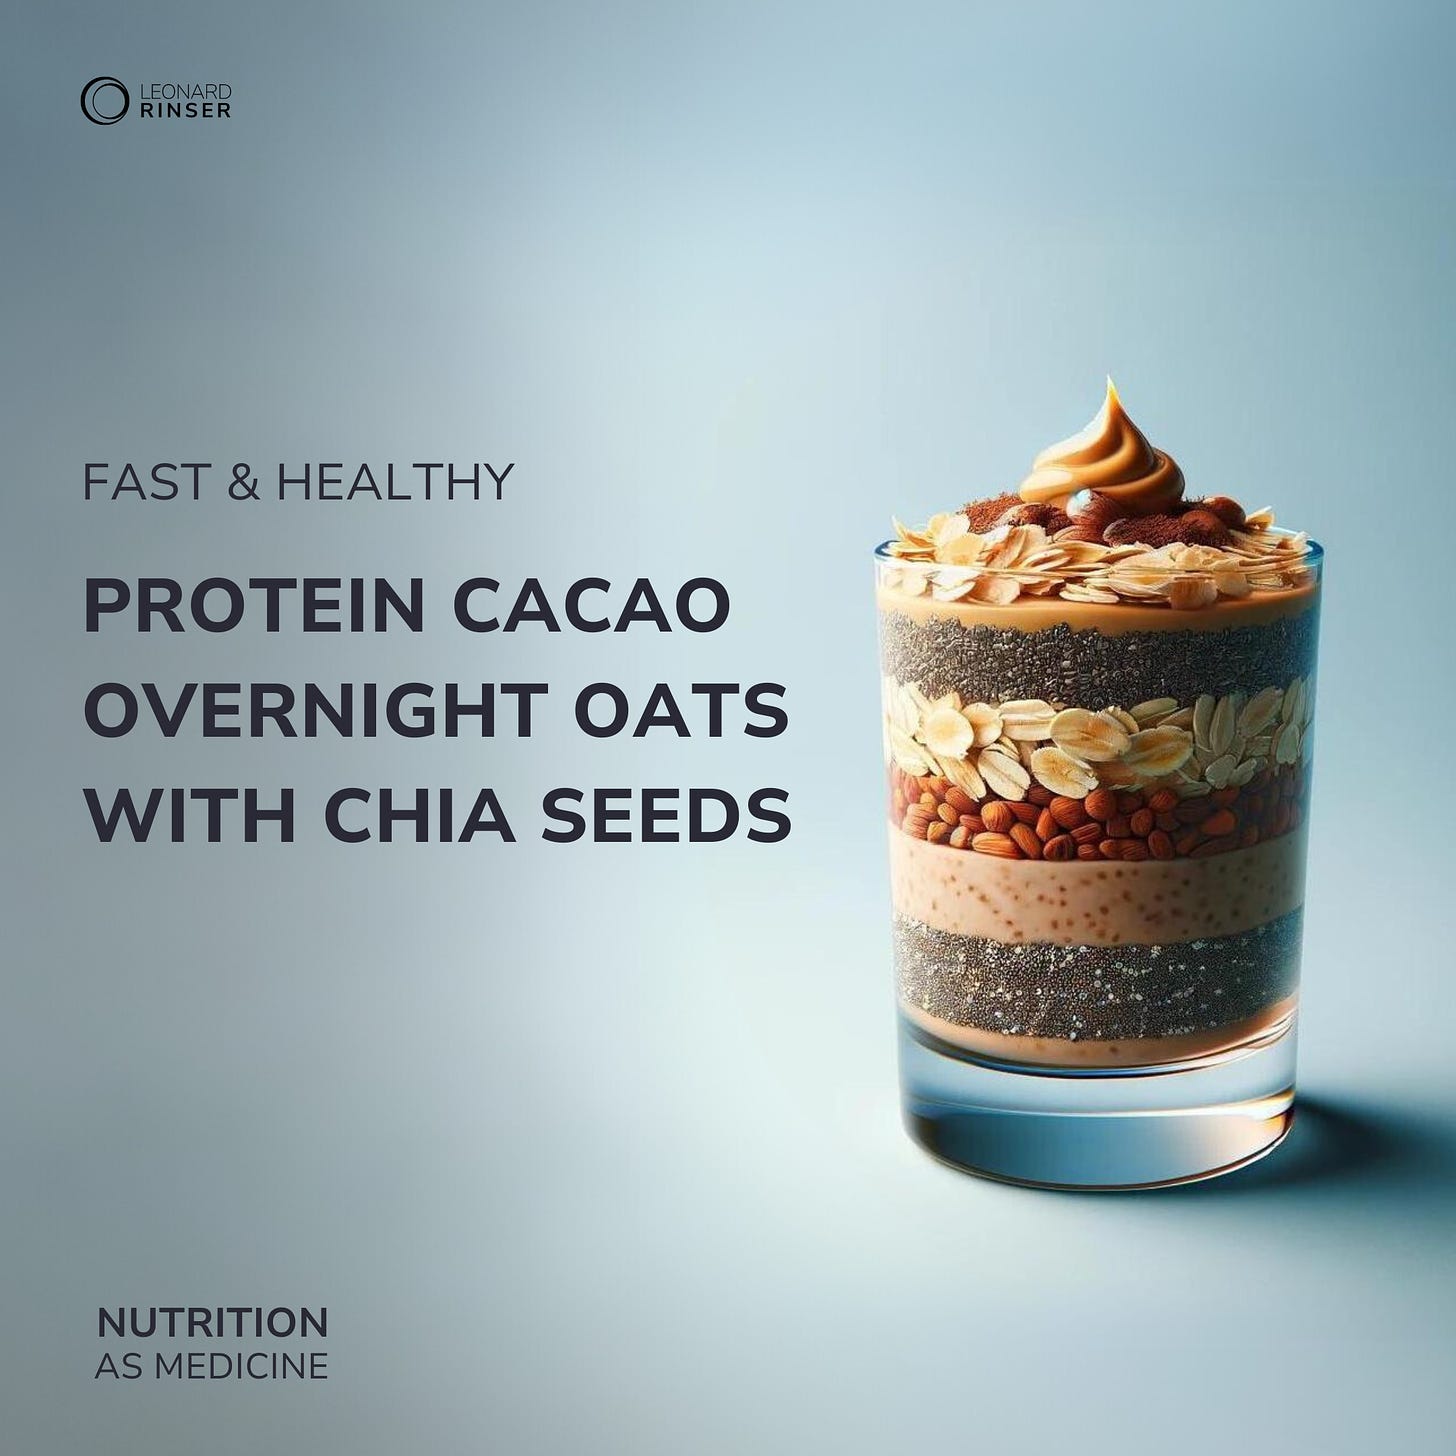 Protein cacao overnight oats with chia seeds